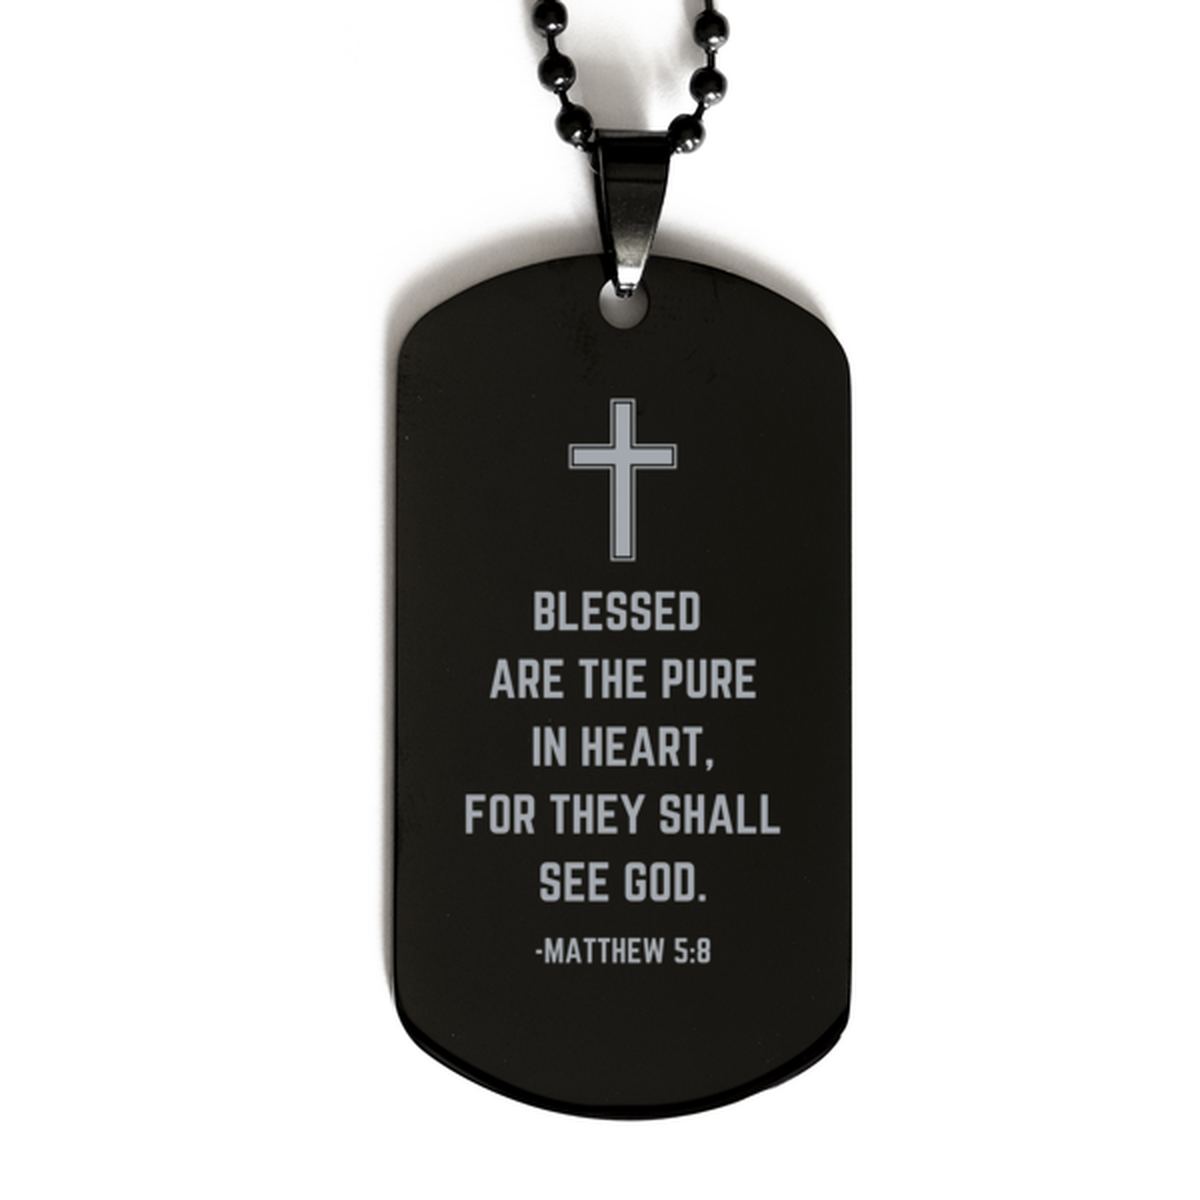 Baptism Gifts For Teenage Boys Girls, Christian Bible Verse Black Dog Tag, Blessed are the pure in heart, Confirmation Gifts, Bible Verse Necklace for Son, Godson, Grandson, Nephew